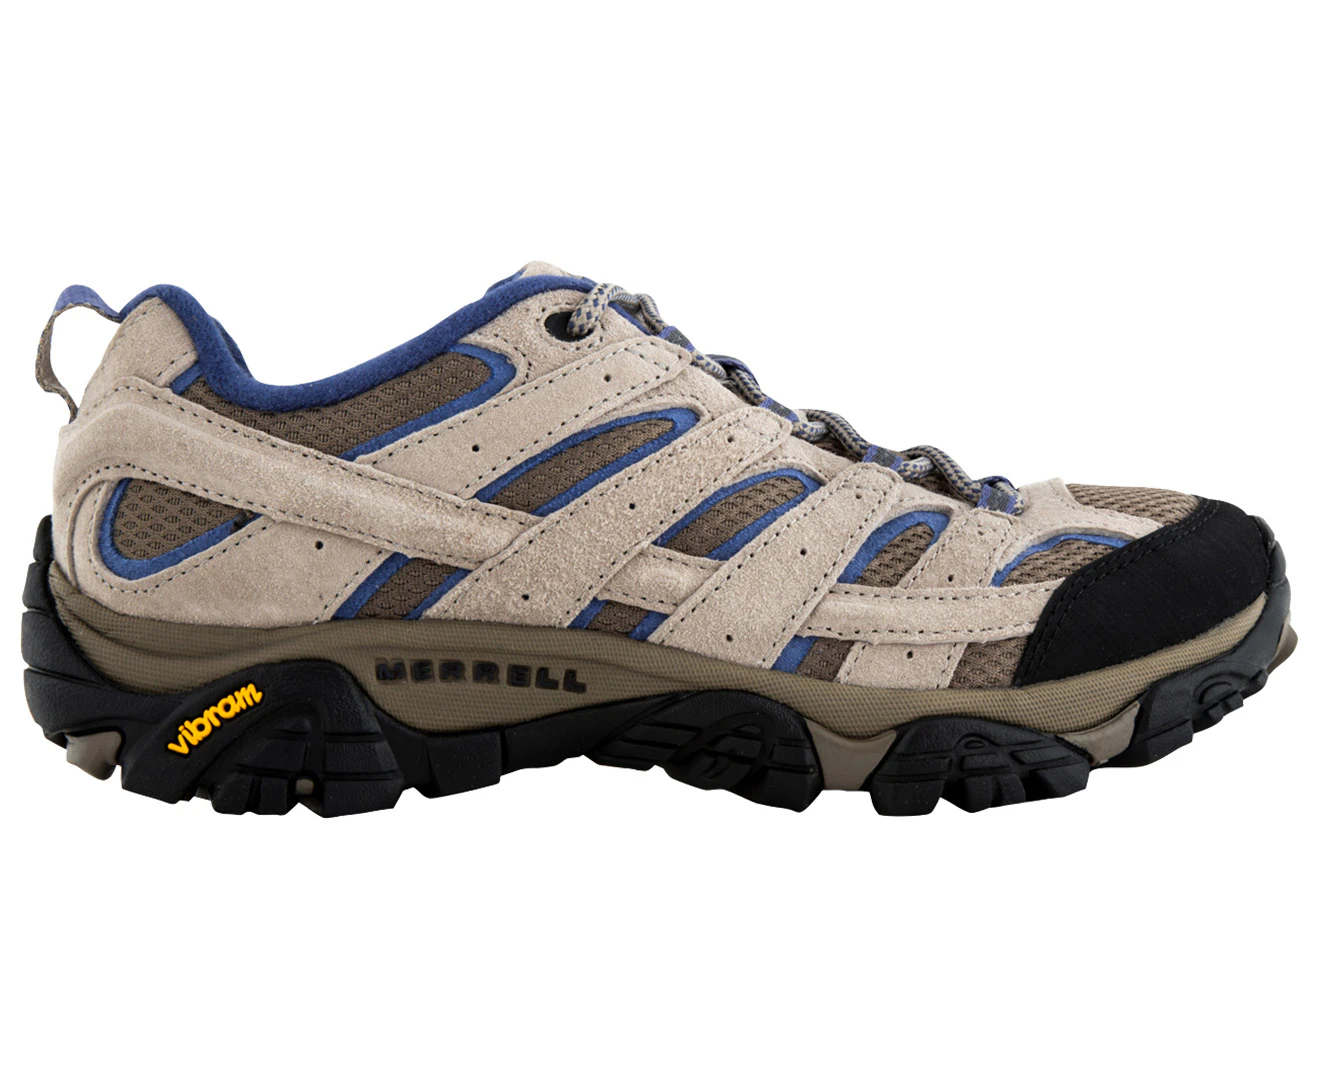 Buy Merrell Hiking Boots More Online | Catch.com.au